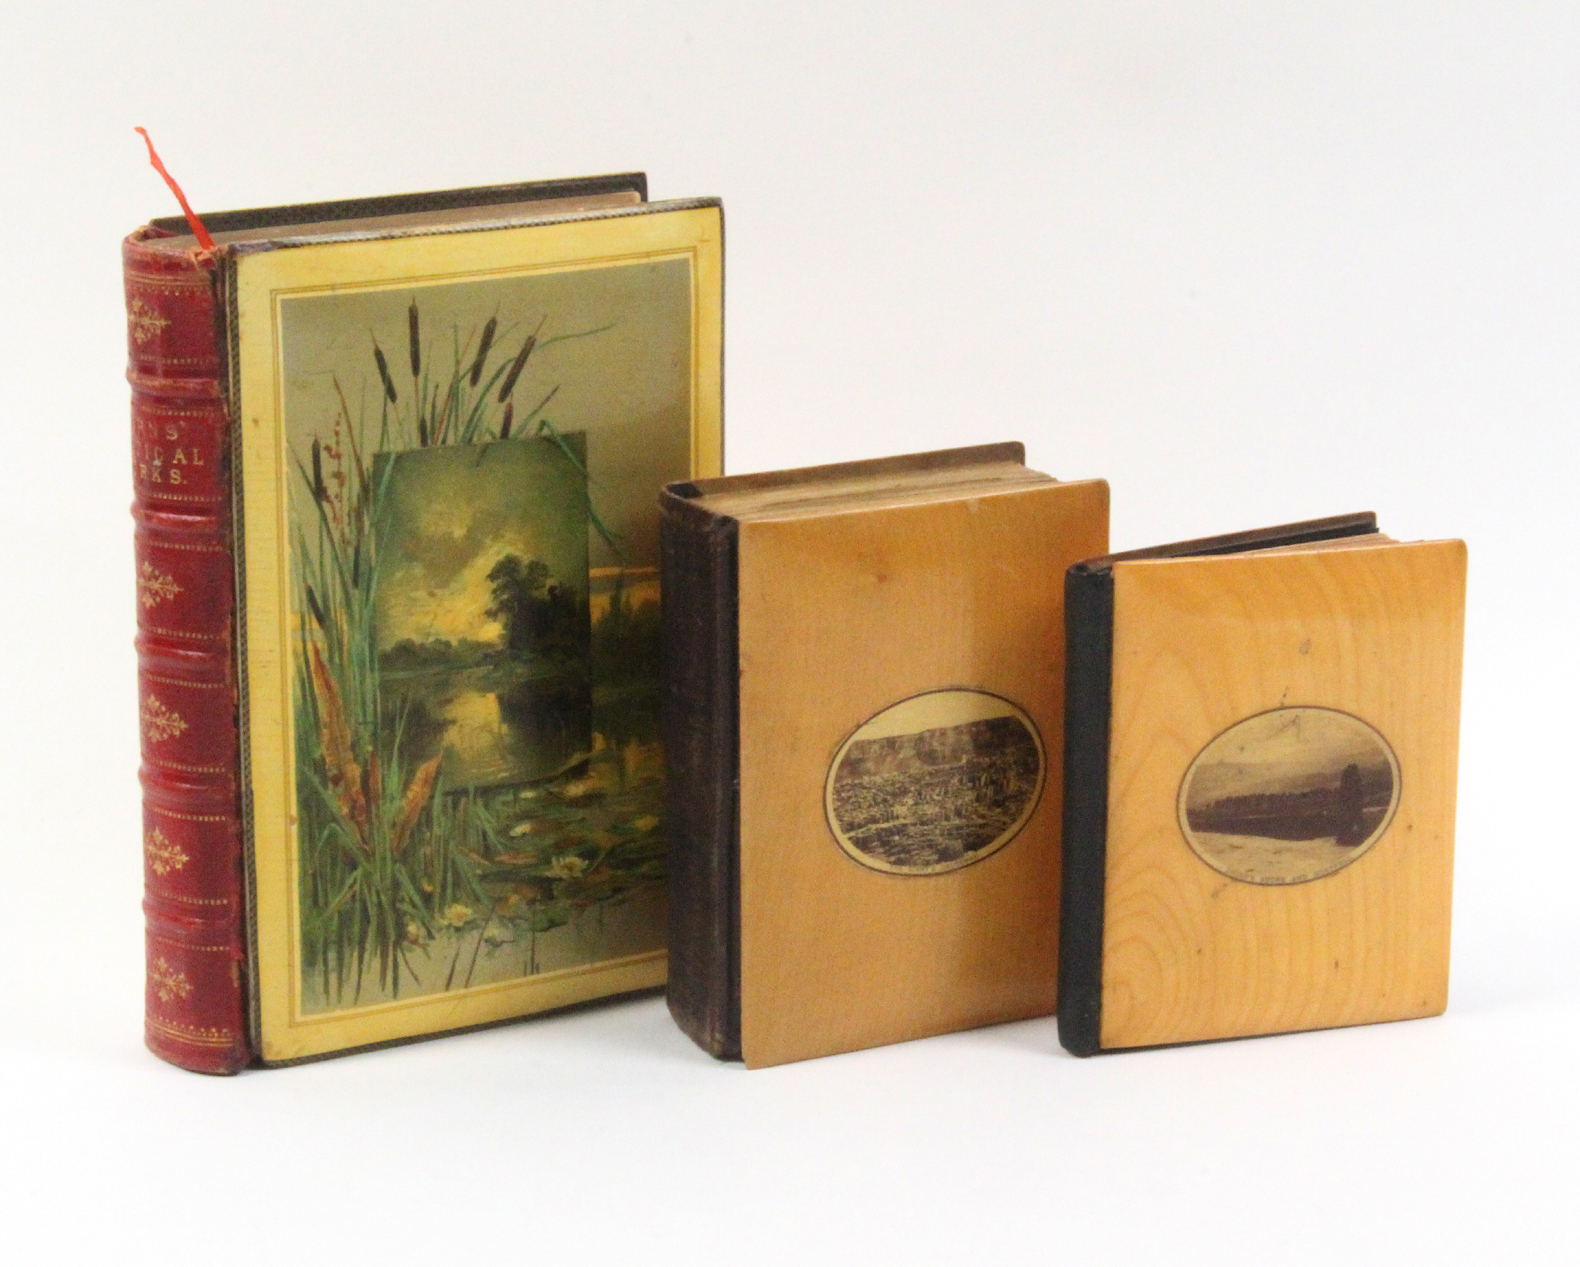 Mauchline ware - three books - comprising Burns Poetical Works (large colour print river